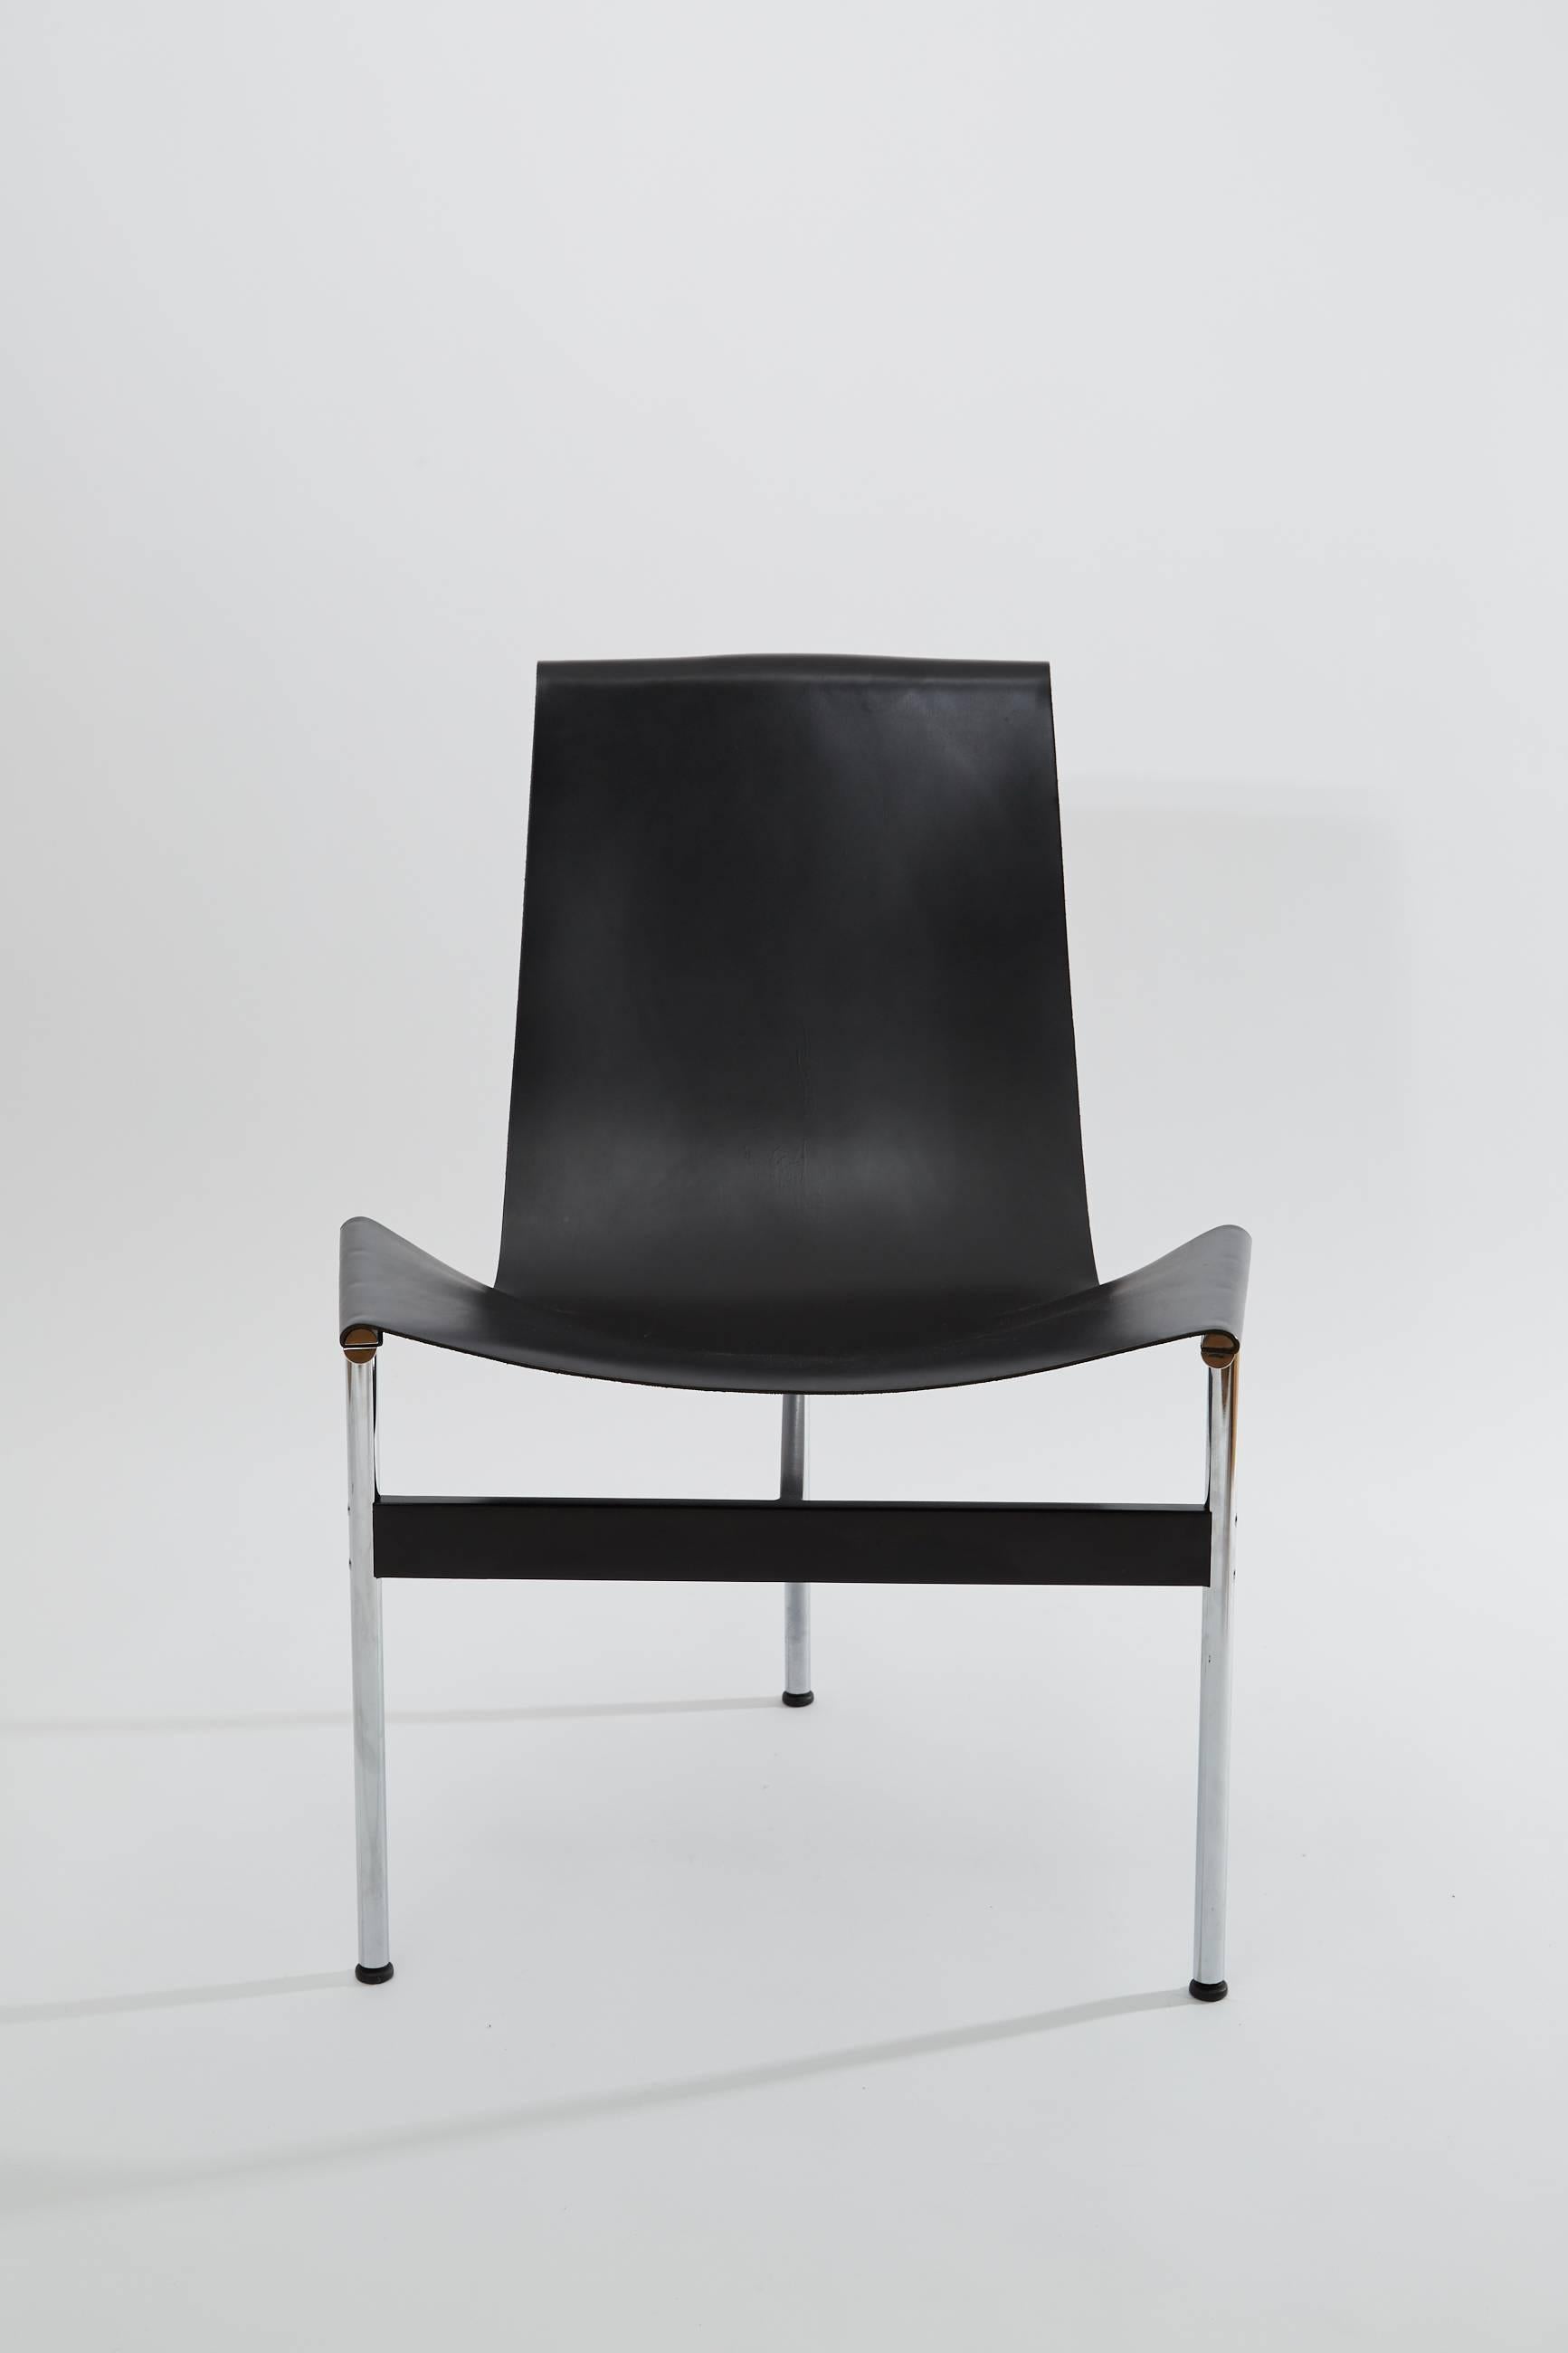 Katavolos Littell Kelley New York T-Chair Chrome Tripod and Black Leather, 1952 For Sale 2